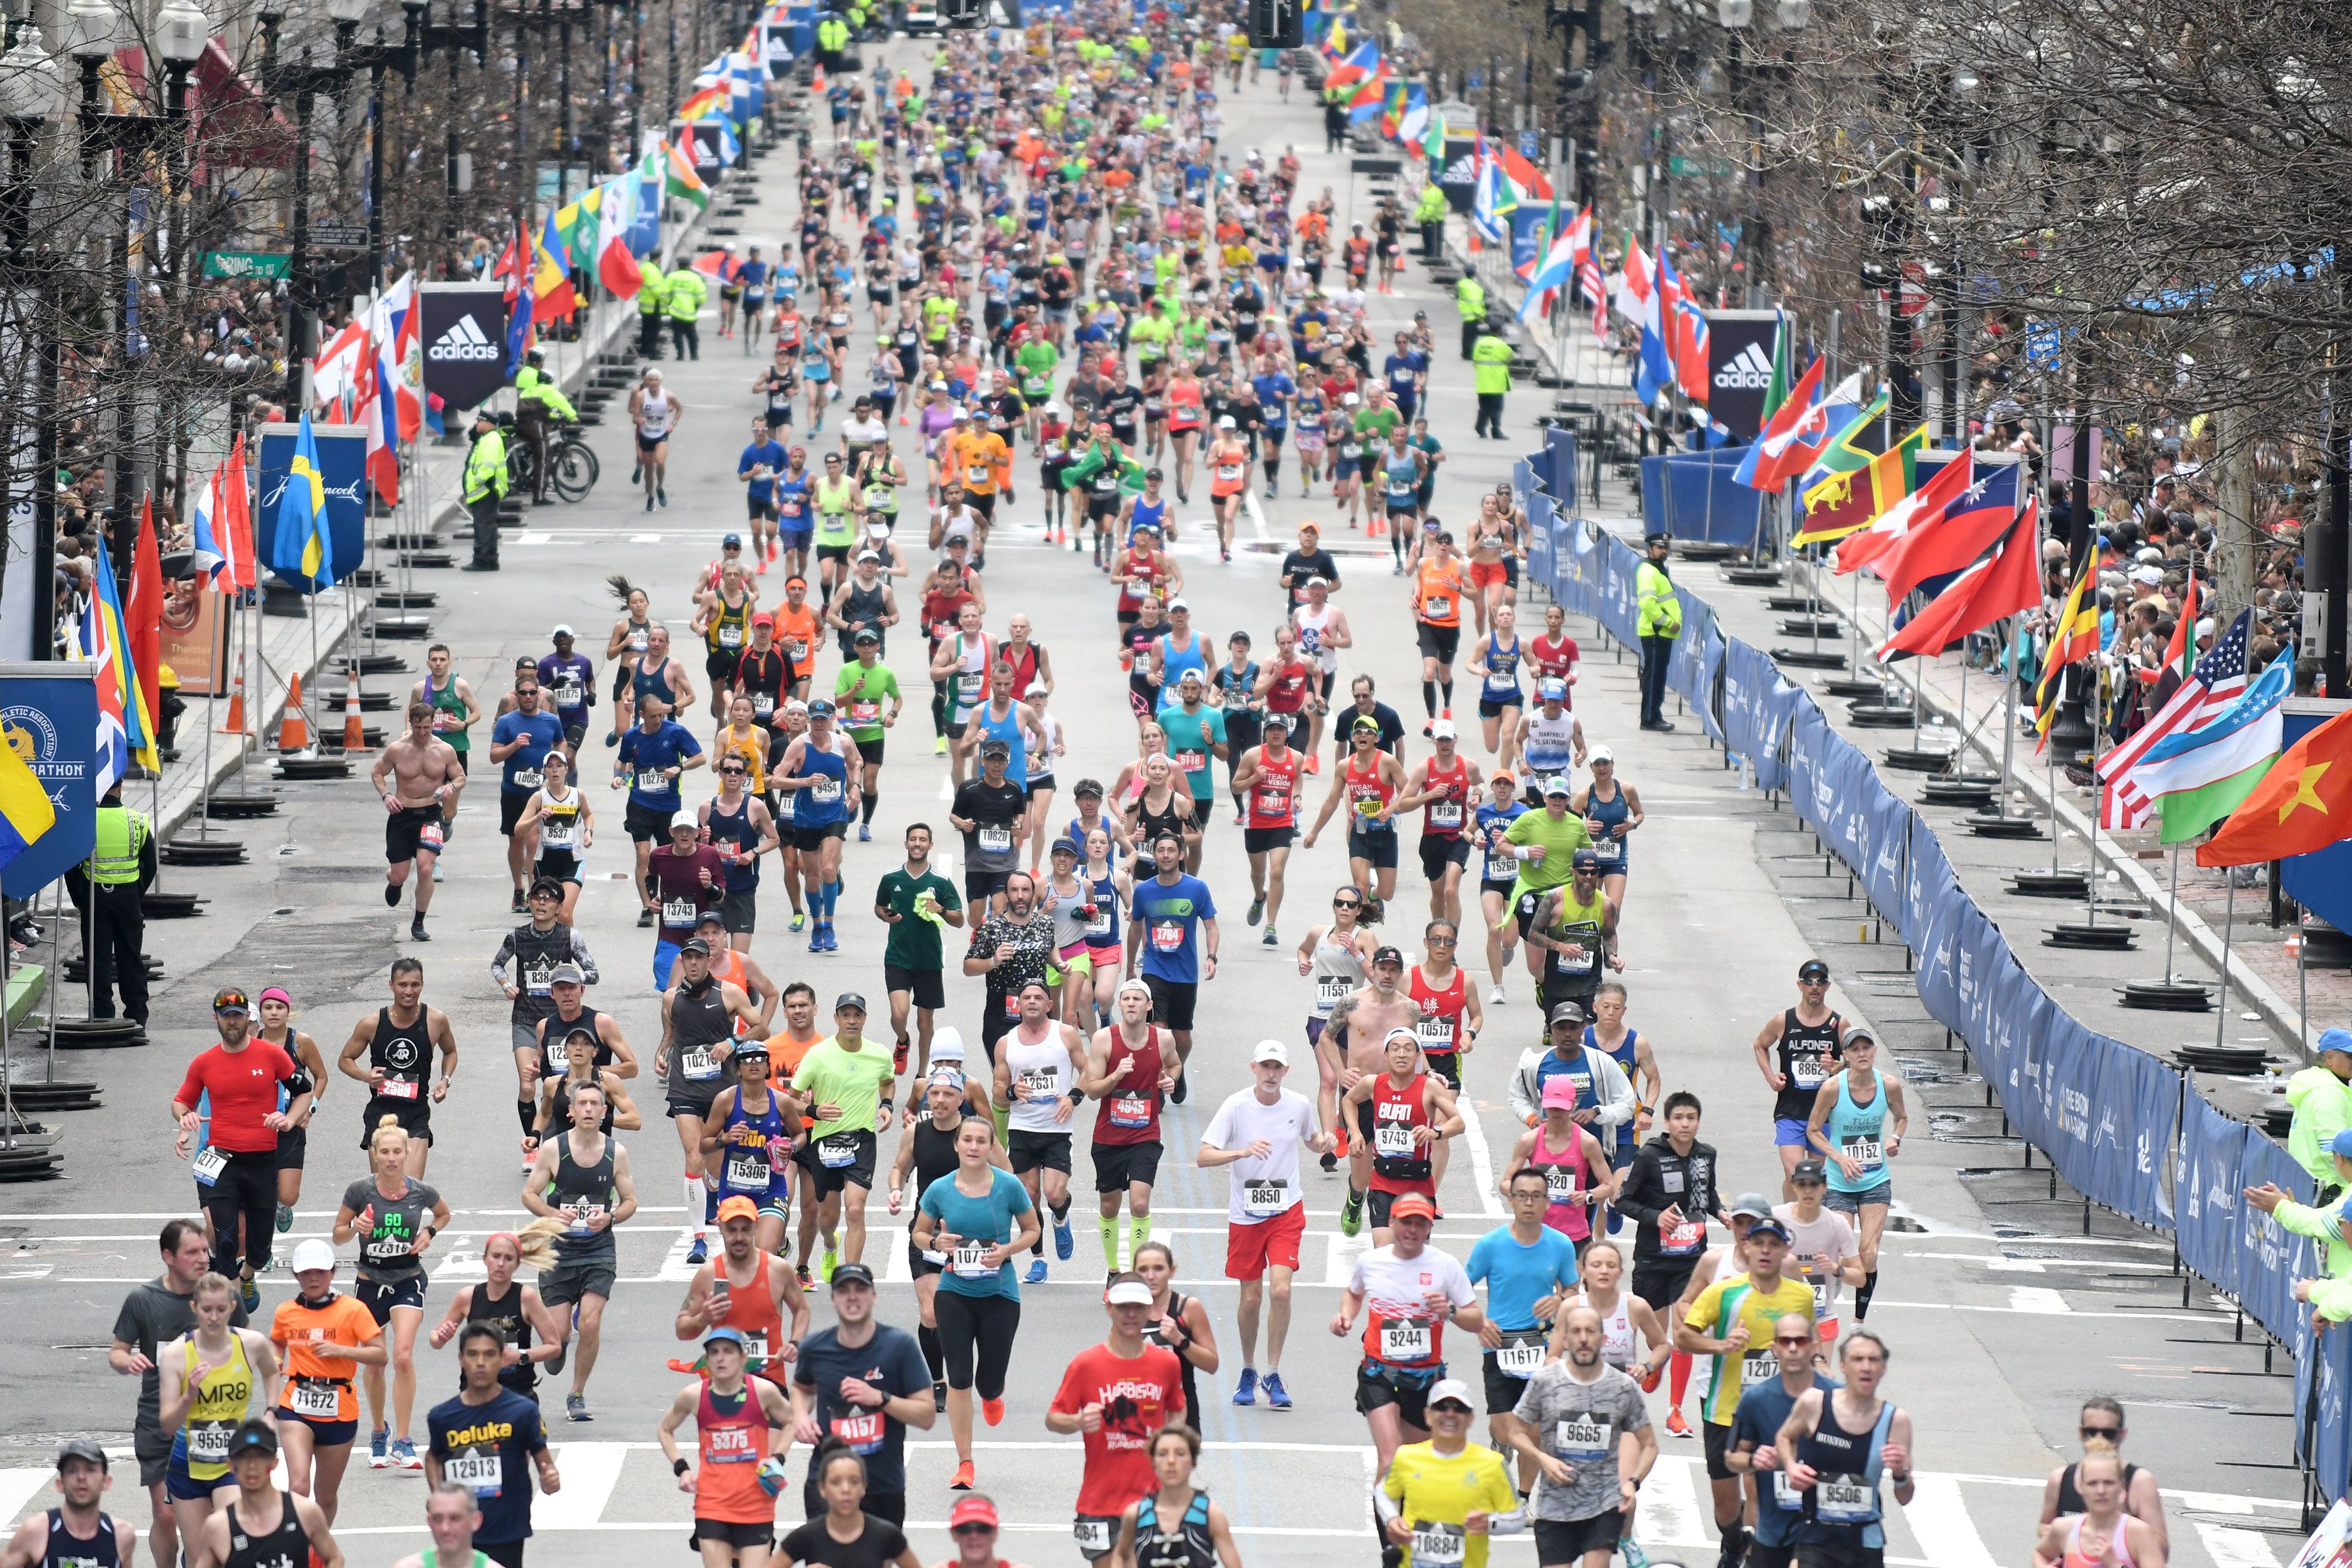 2020 Boston Marathon Cancelled For 1st Time Ever; Will Be Staged